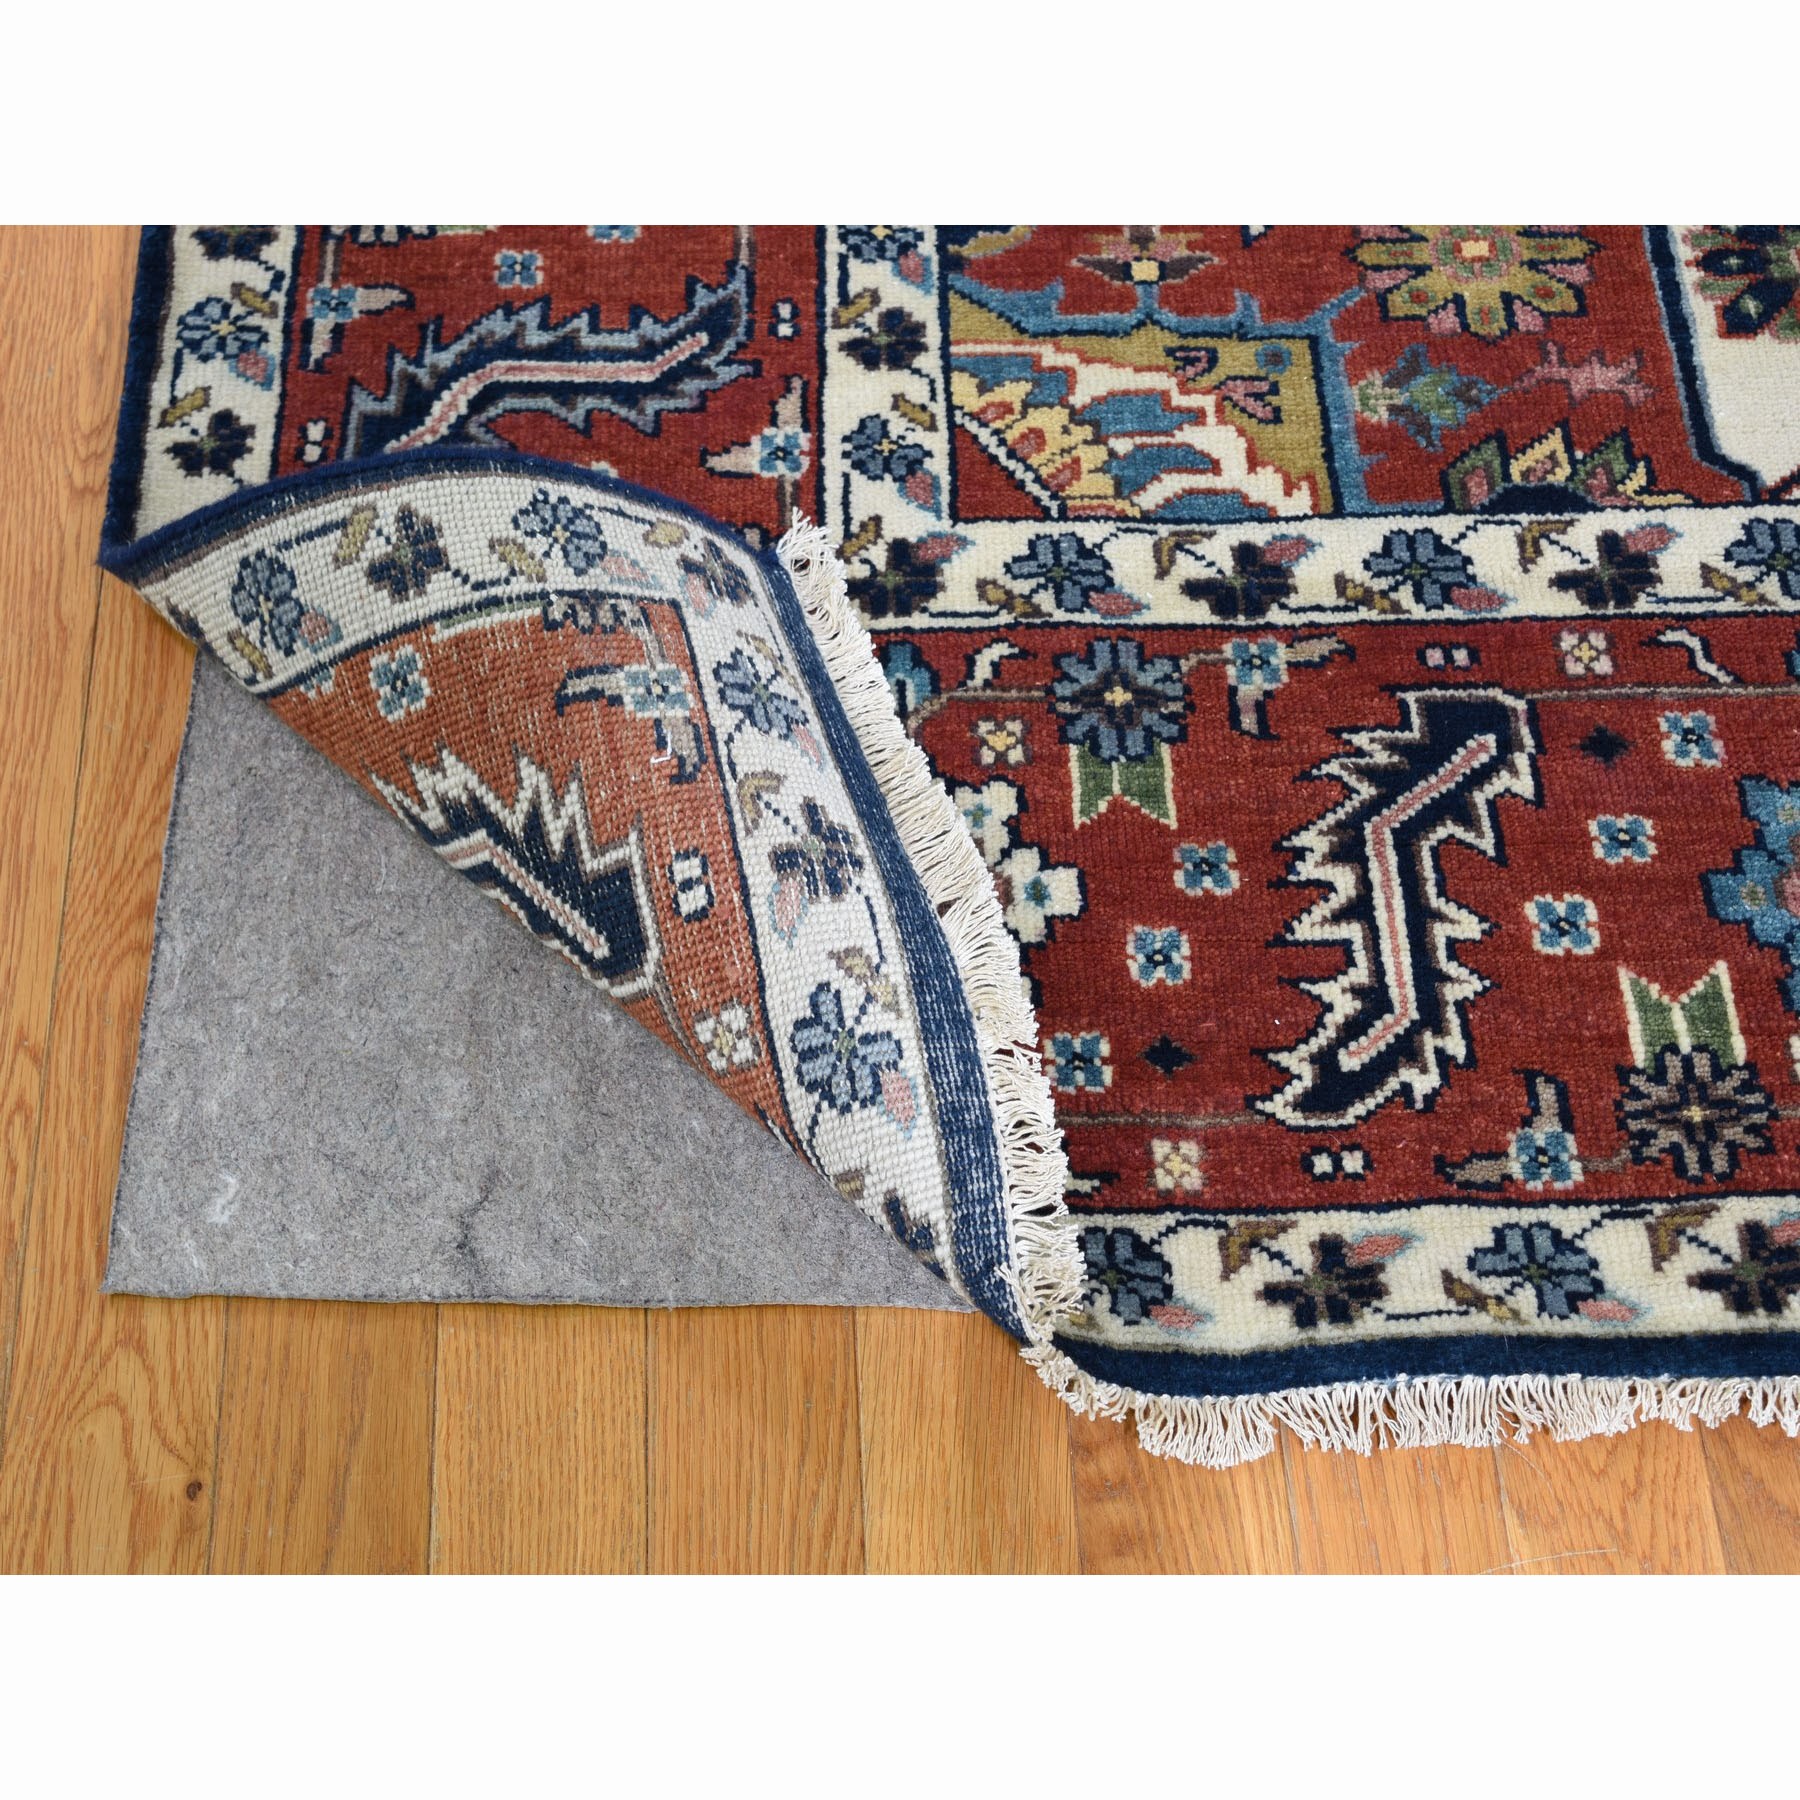 7-10 x10- Navy Blue Heriz Revival Pure Wool Hand Knotted Oriental Rug 